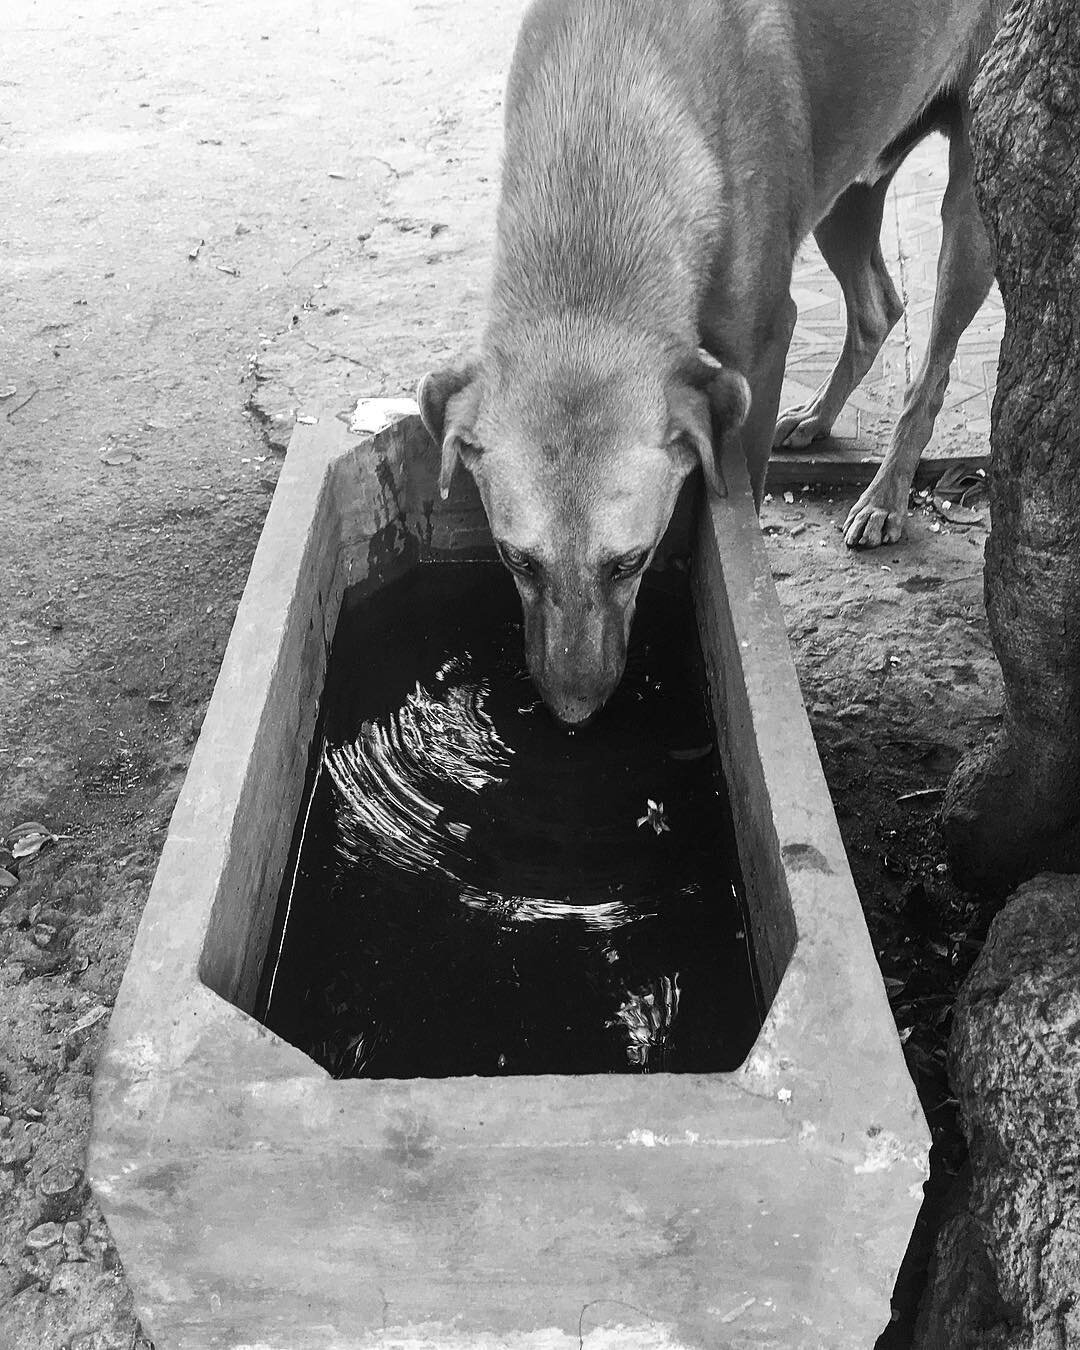 Thirsty dog .
.
.
.
.

#india #animal #bnw #blackandwhite #heat #summer #street #animals #contrast #iphoneonly #iphoneasia #iphone6splus #snapseed #picoftheday #photooftheday #cool